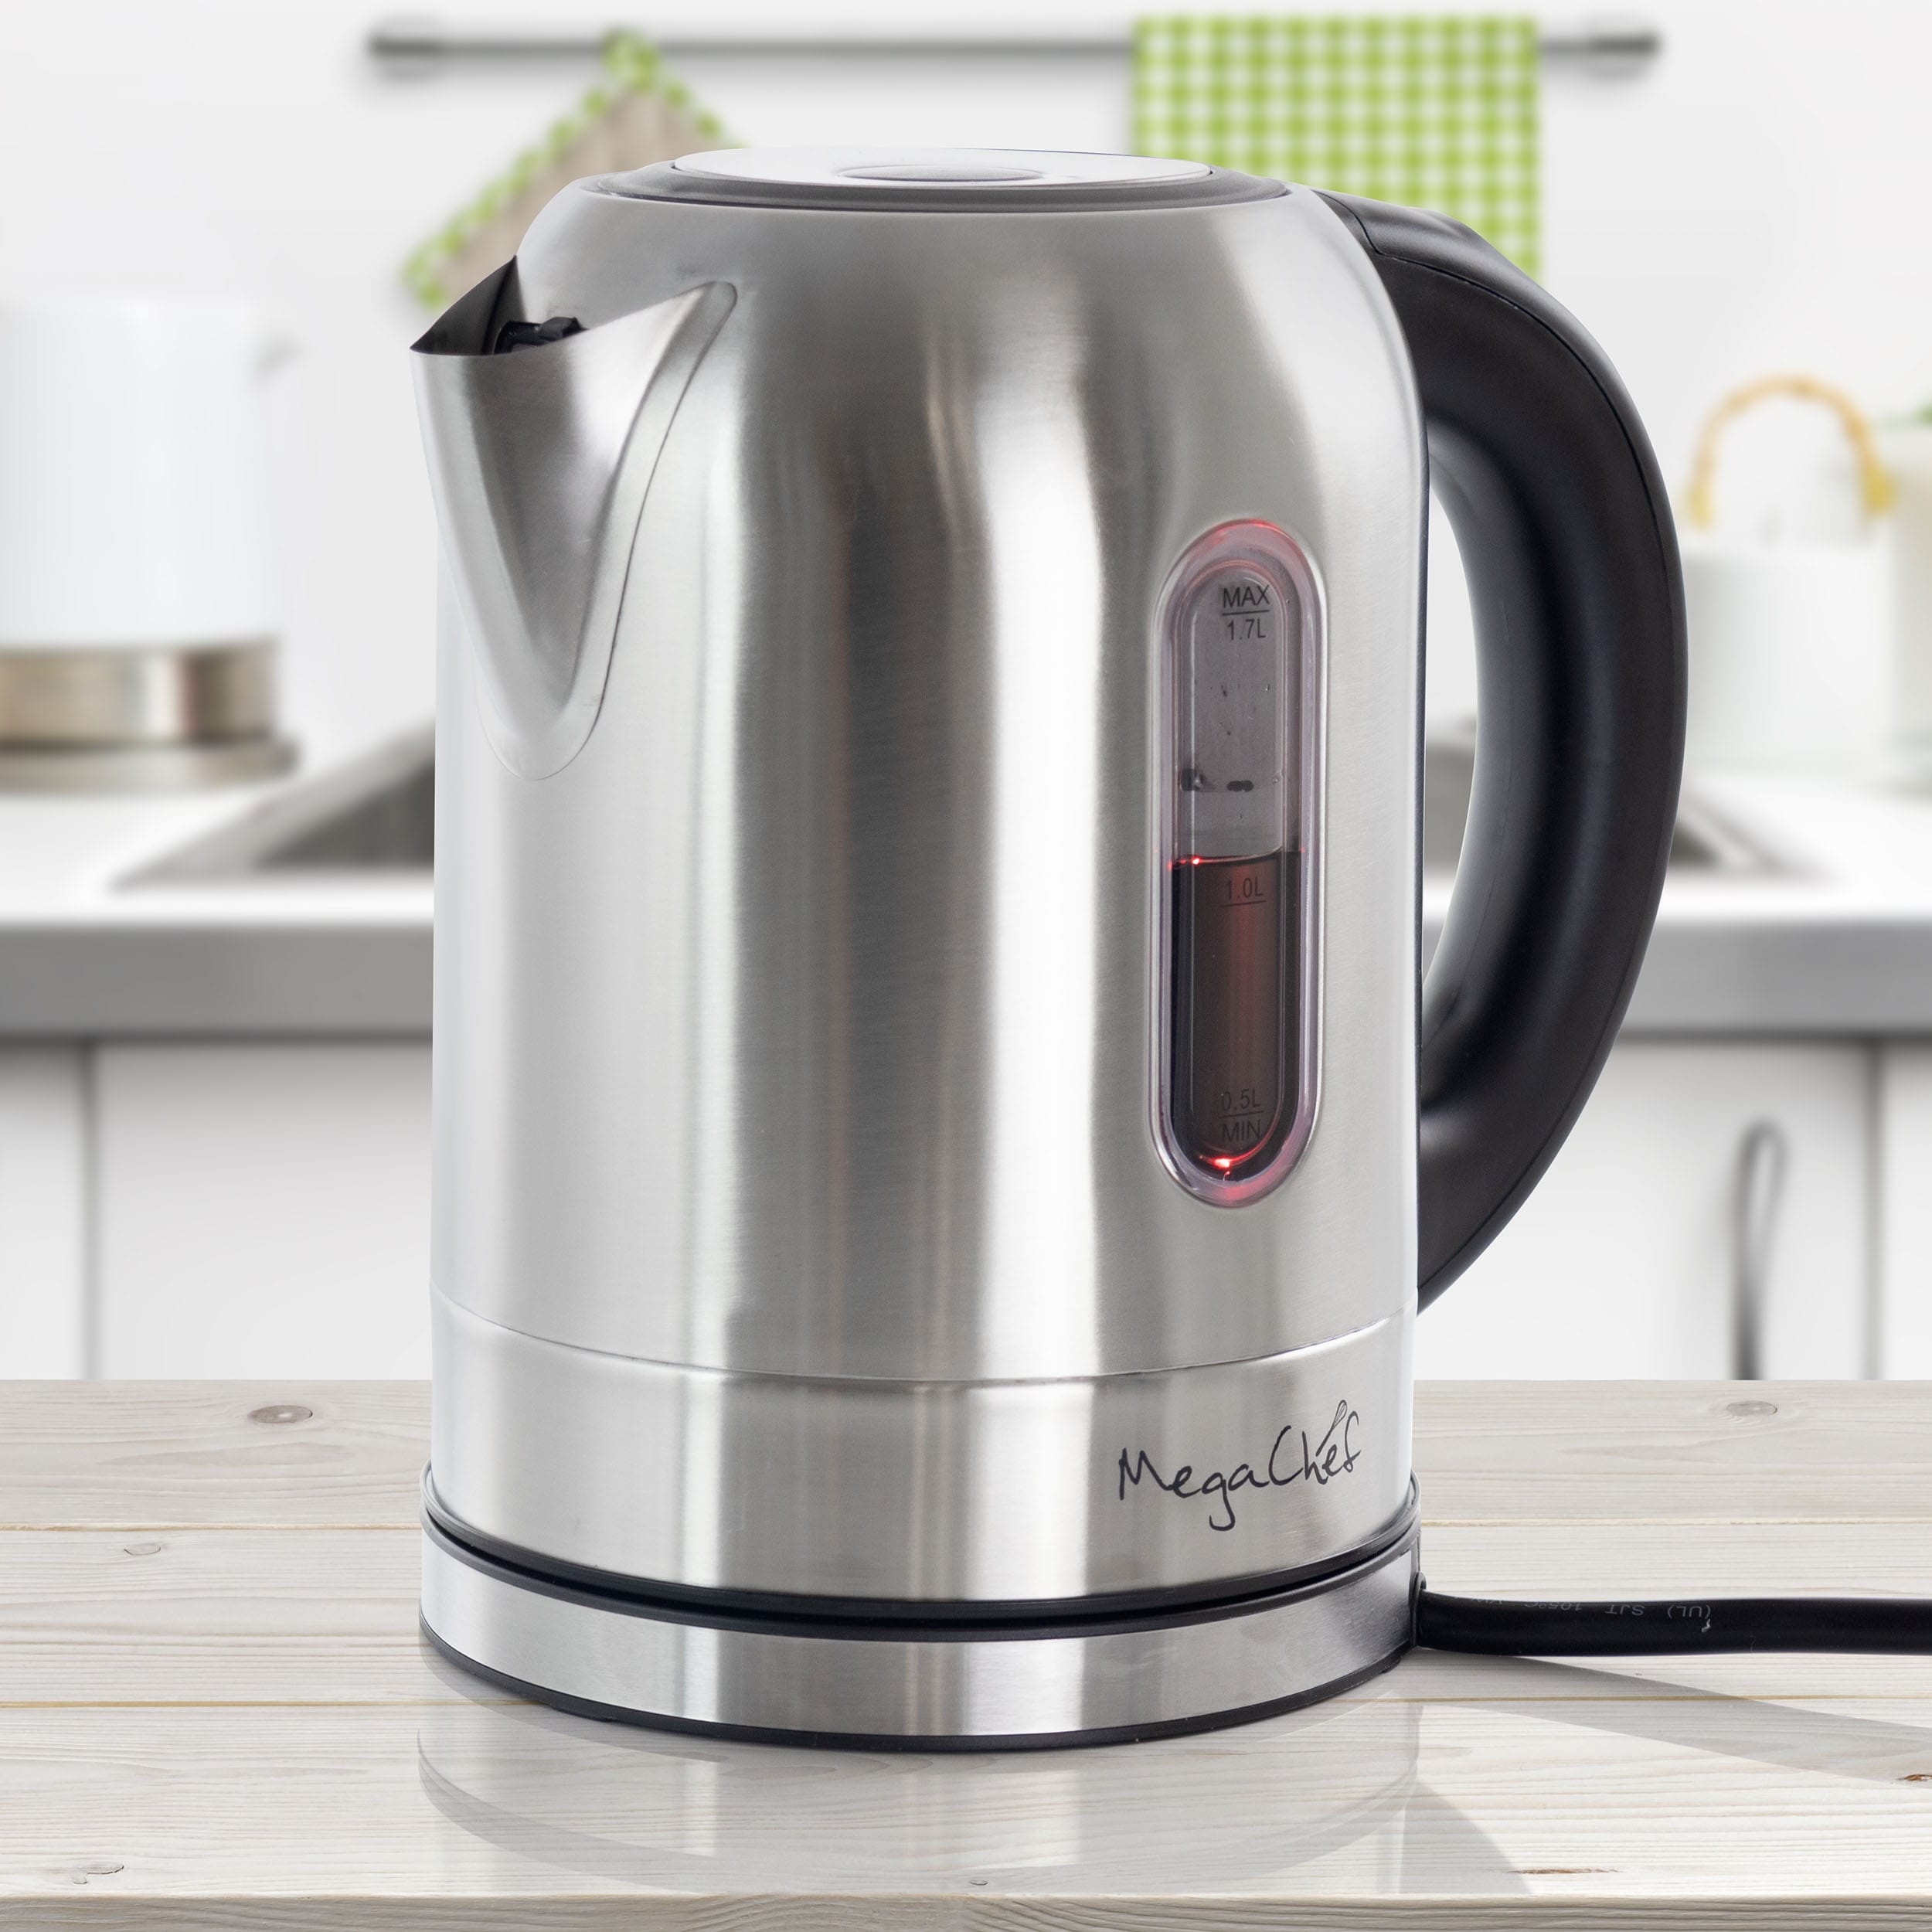 MegaChef 1.7-Liter Stainless Steel Electric Tea Kettle, with 5 Preset Temperatures, Silver